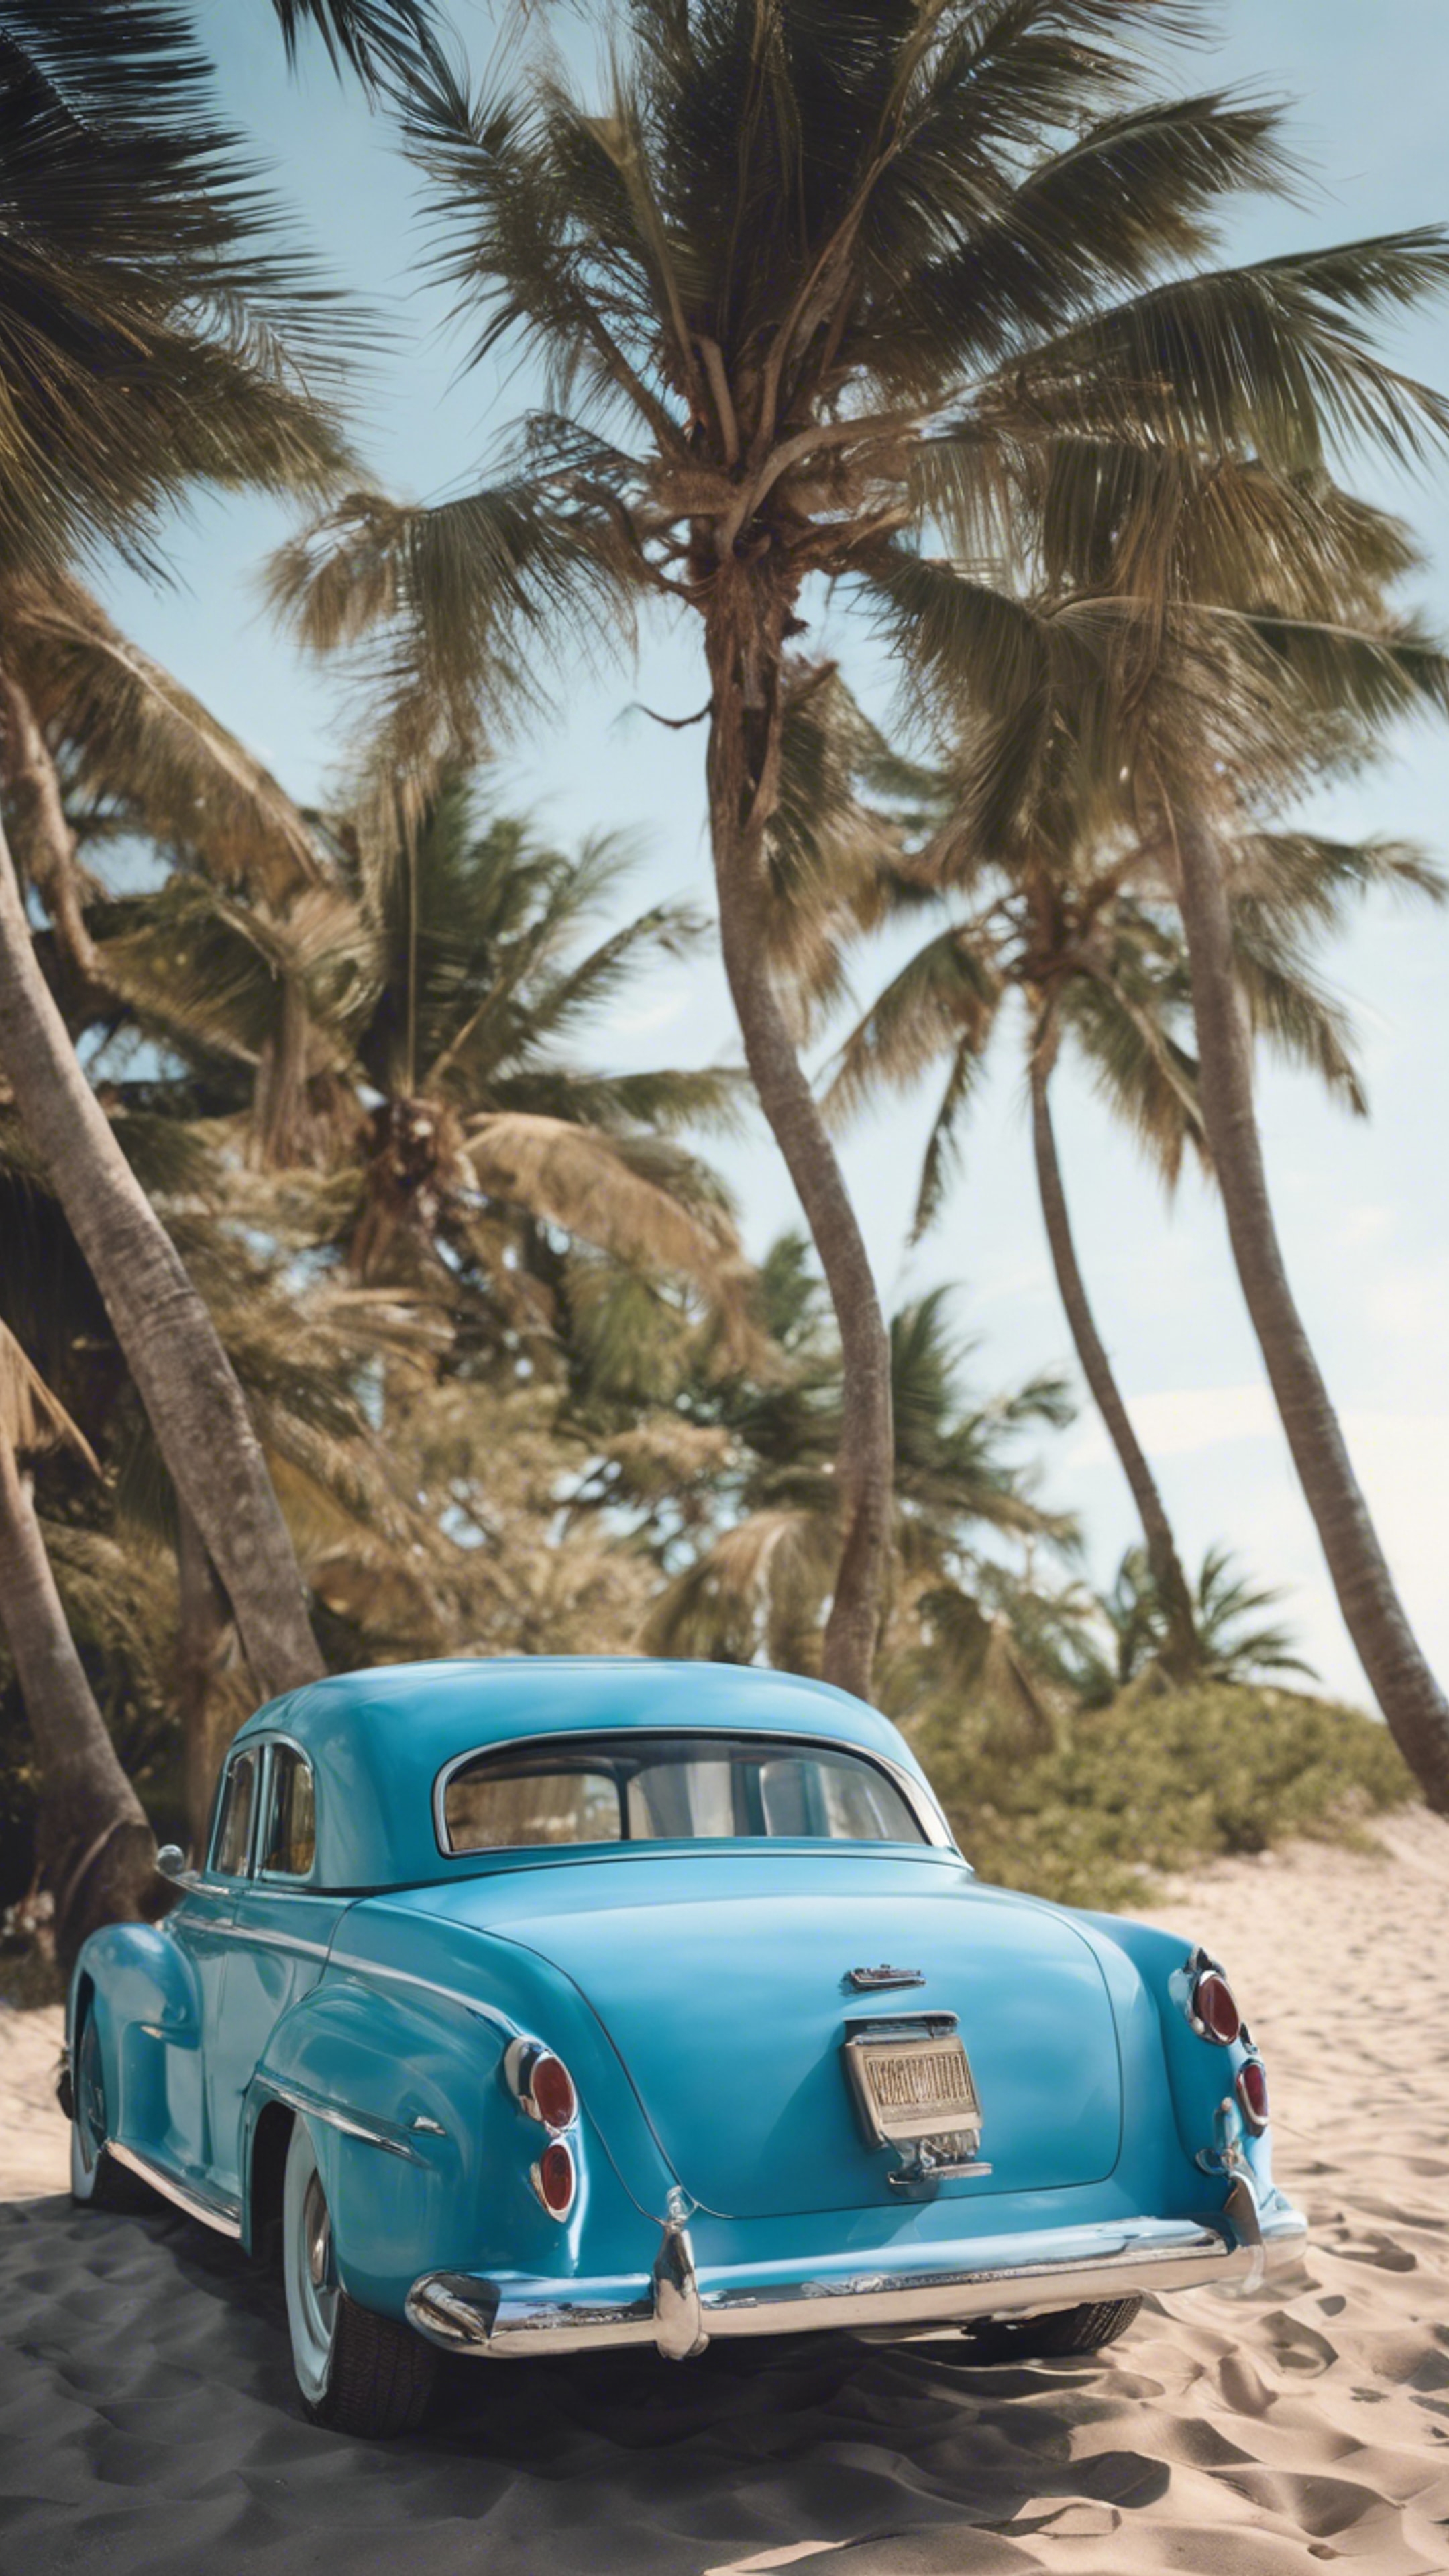 A vintage car painted in cool blue, parked by the beach Валлпапер[7559f4037ca44818afd1]